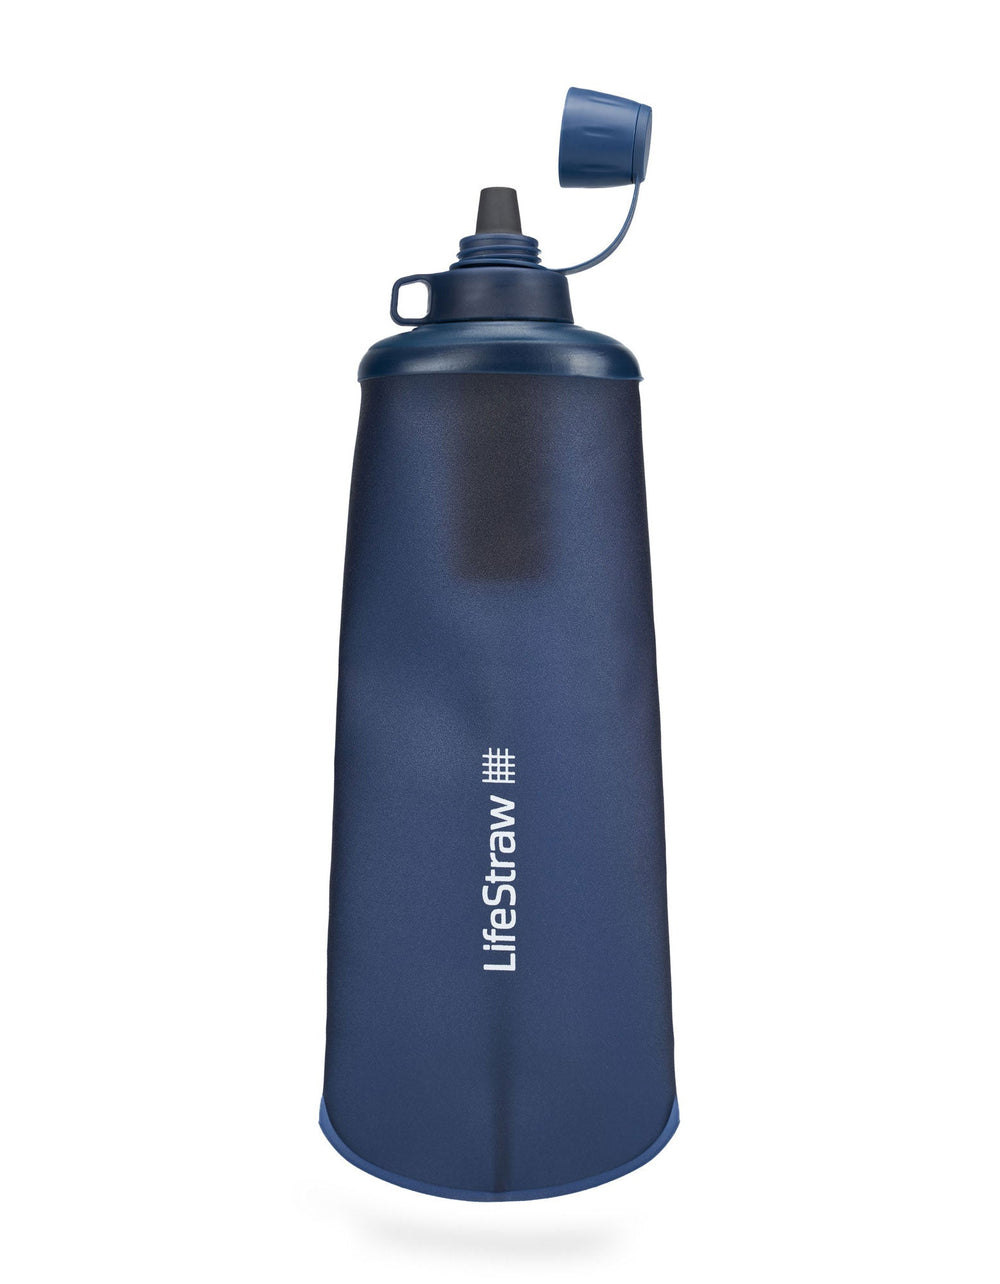 LifeStraw - 1Lt Collapsible Squeeze Bottle - Mountain Blue-3